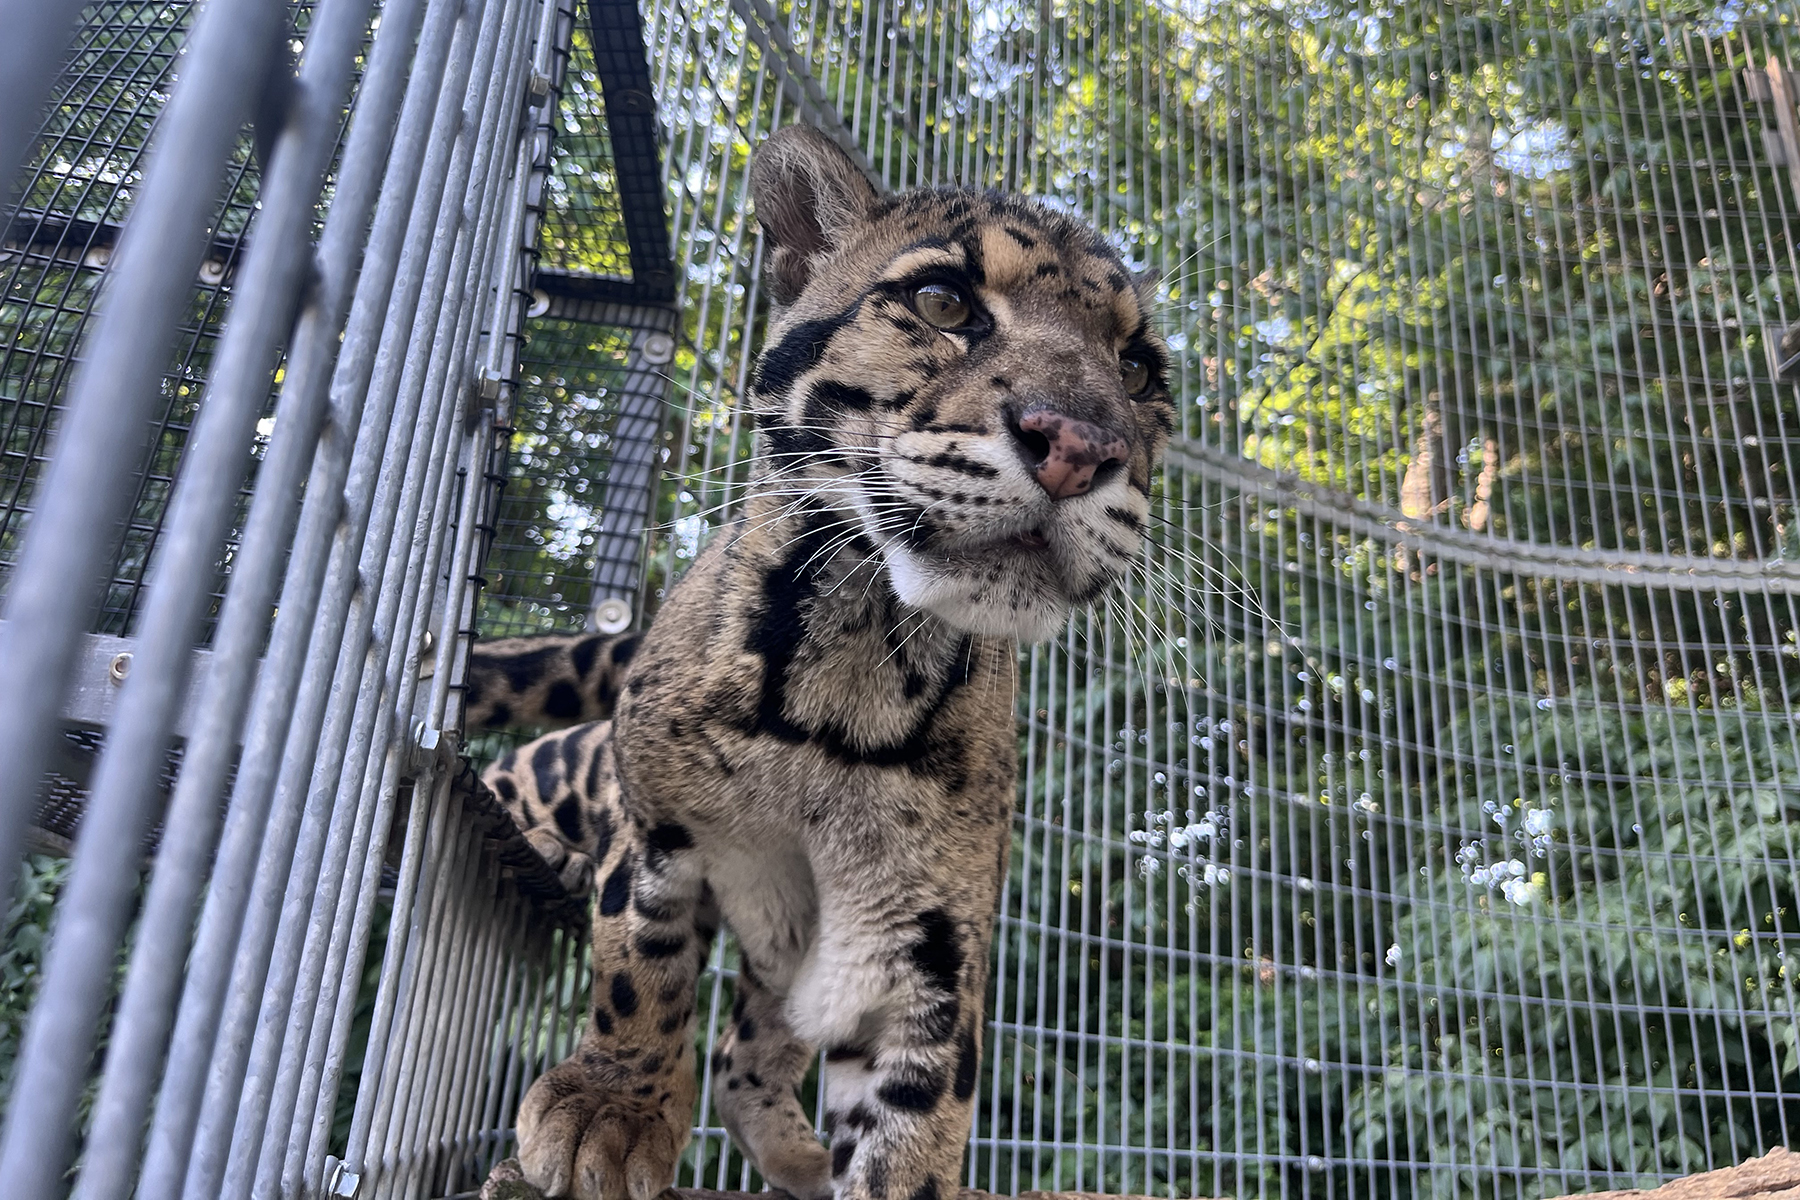 Clouded leopard Masala in his outdoor enclosure at the Smithsonian Conservation Biology Institute.